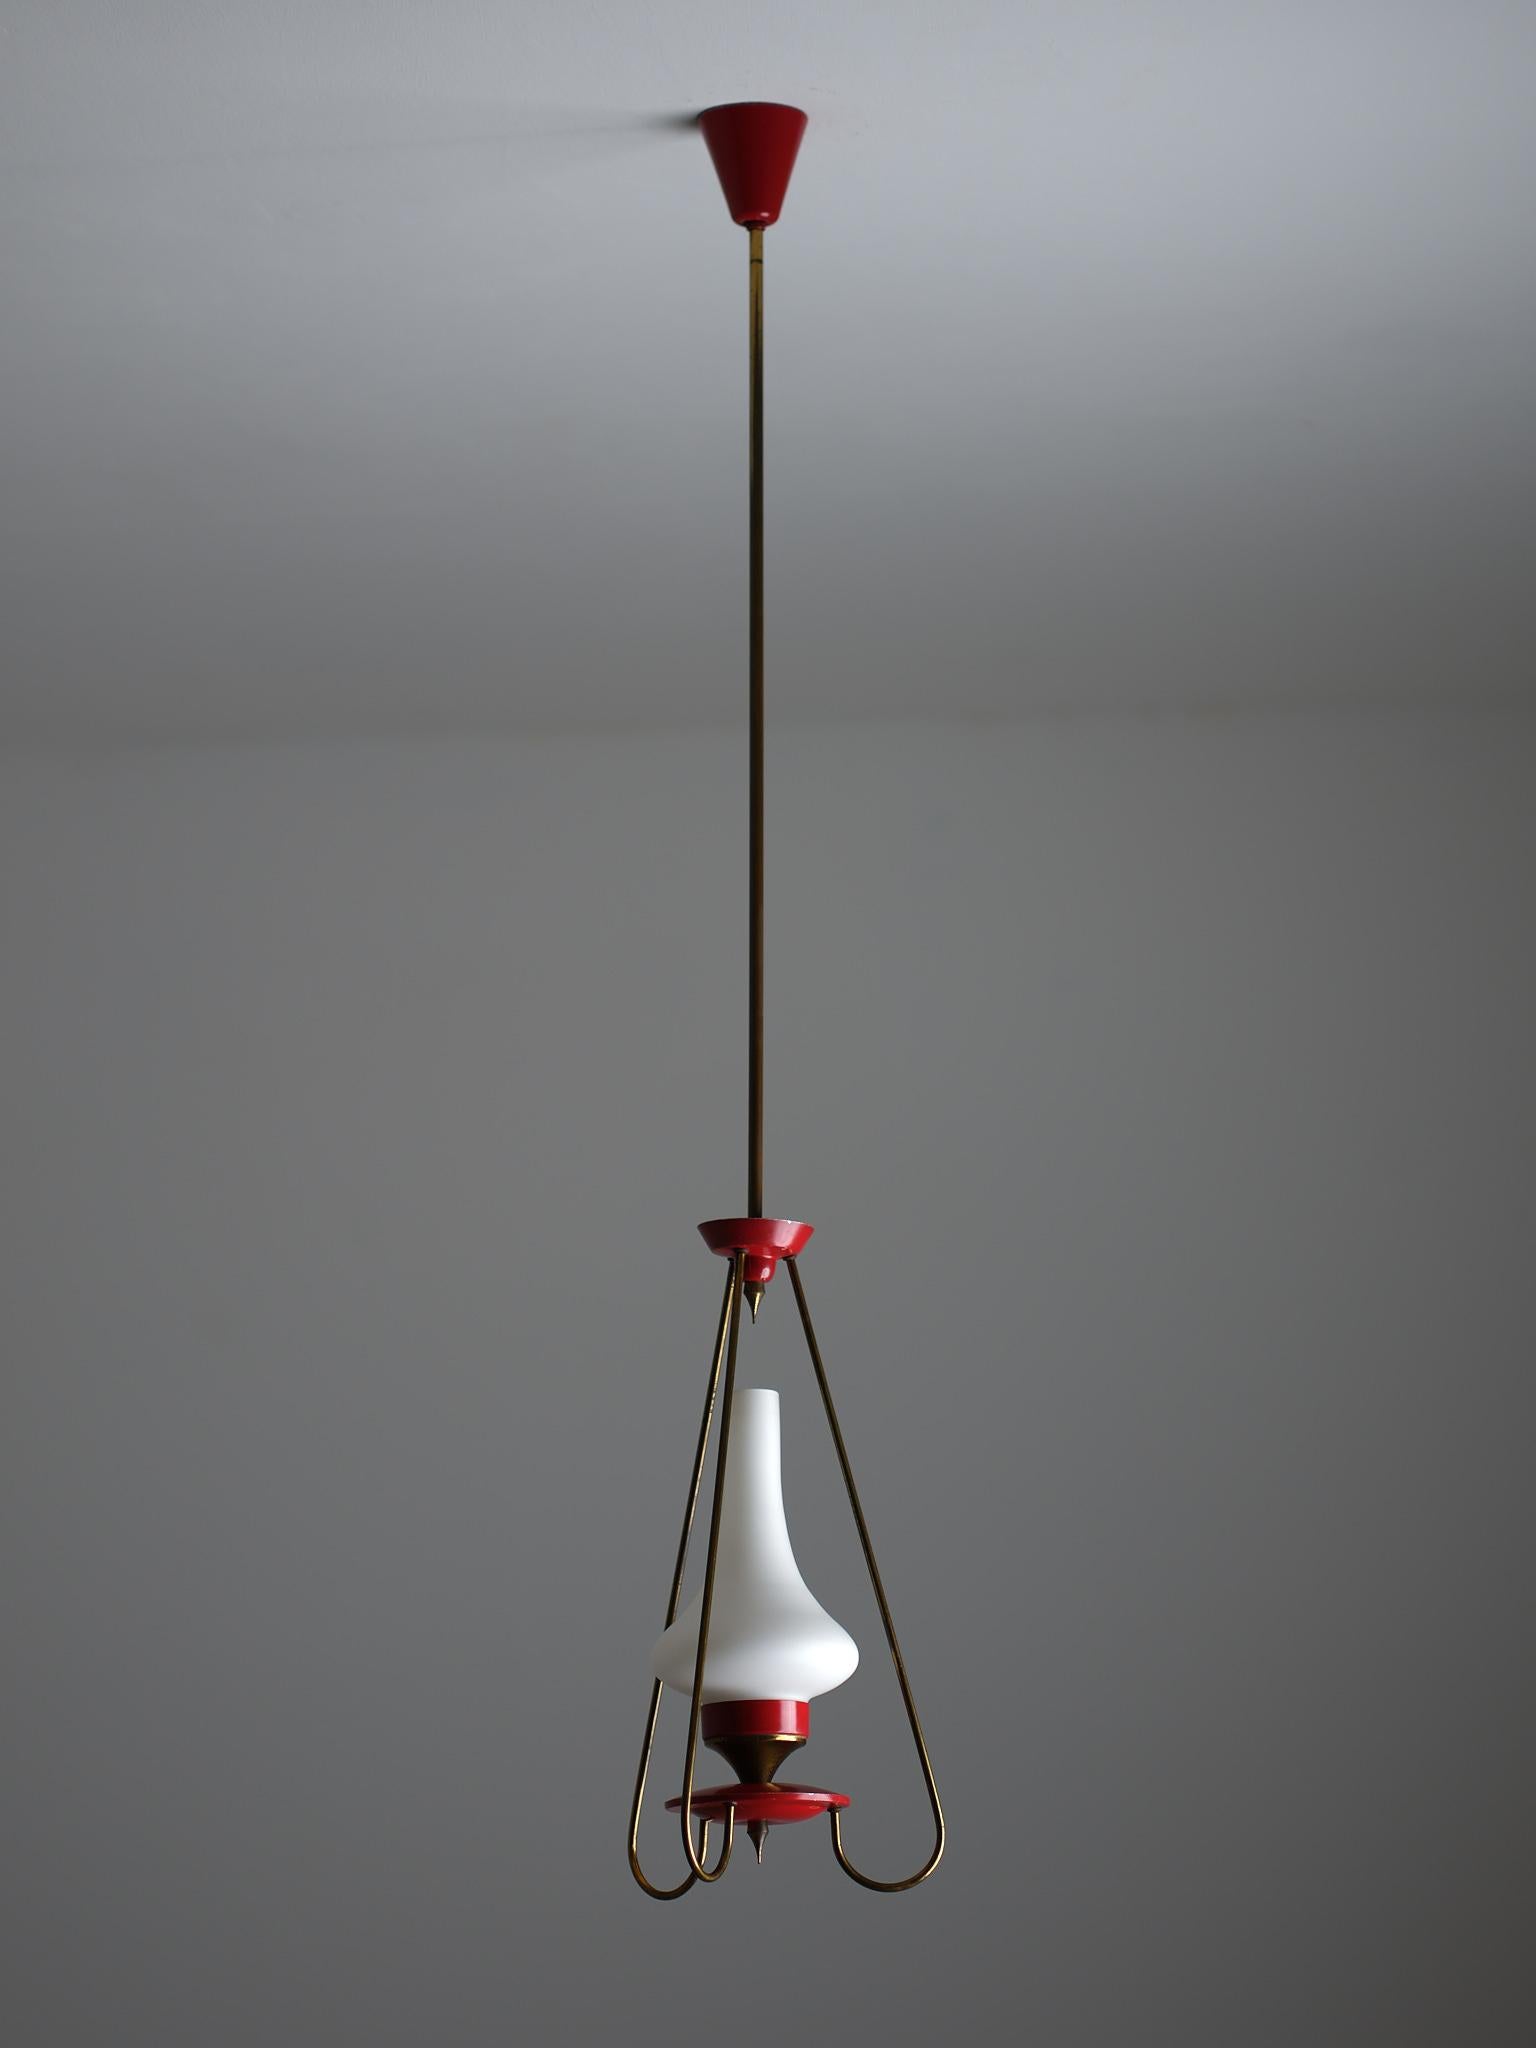 Mid-Century Modern Italian Pendant Lamp in Brass, Red Metal and Opaline Glass, 1950s For Sale